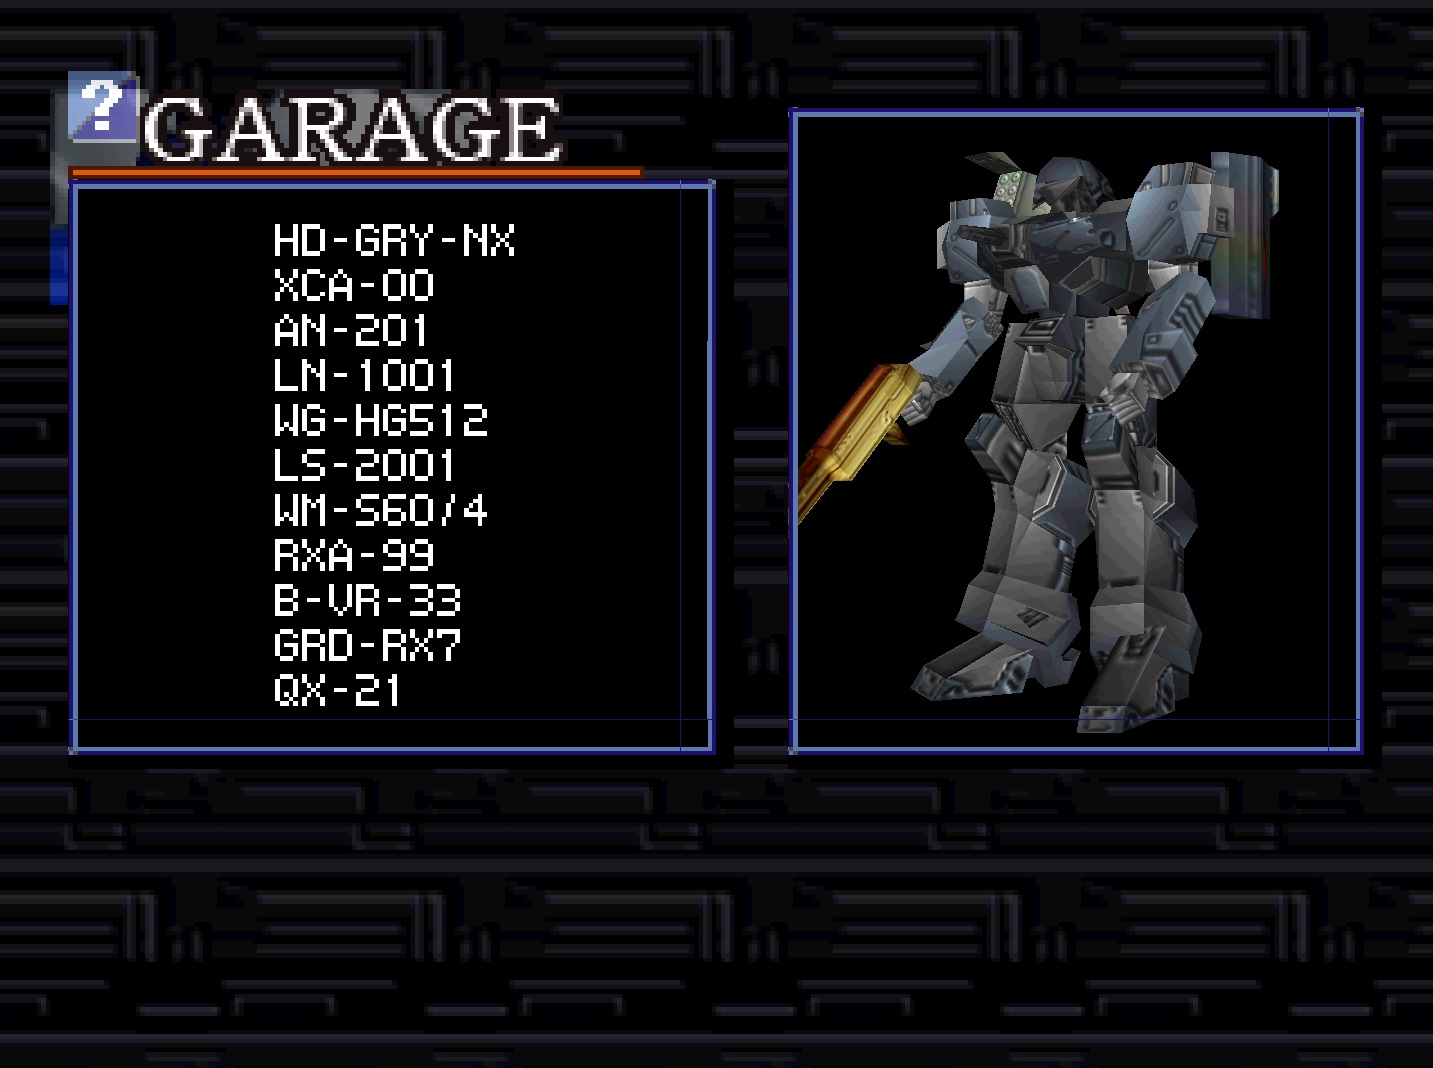 Hellhound 13th Ac Avenger Type 1 Type 2 And Type 3 Part Lists Armoredcore アーマードコア T Co Agg7yqzvar Twitter